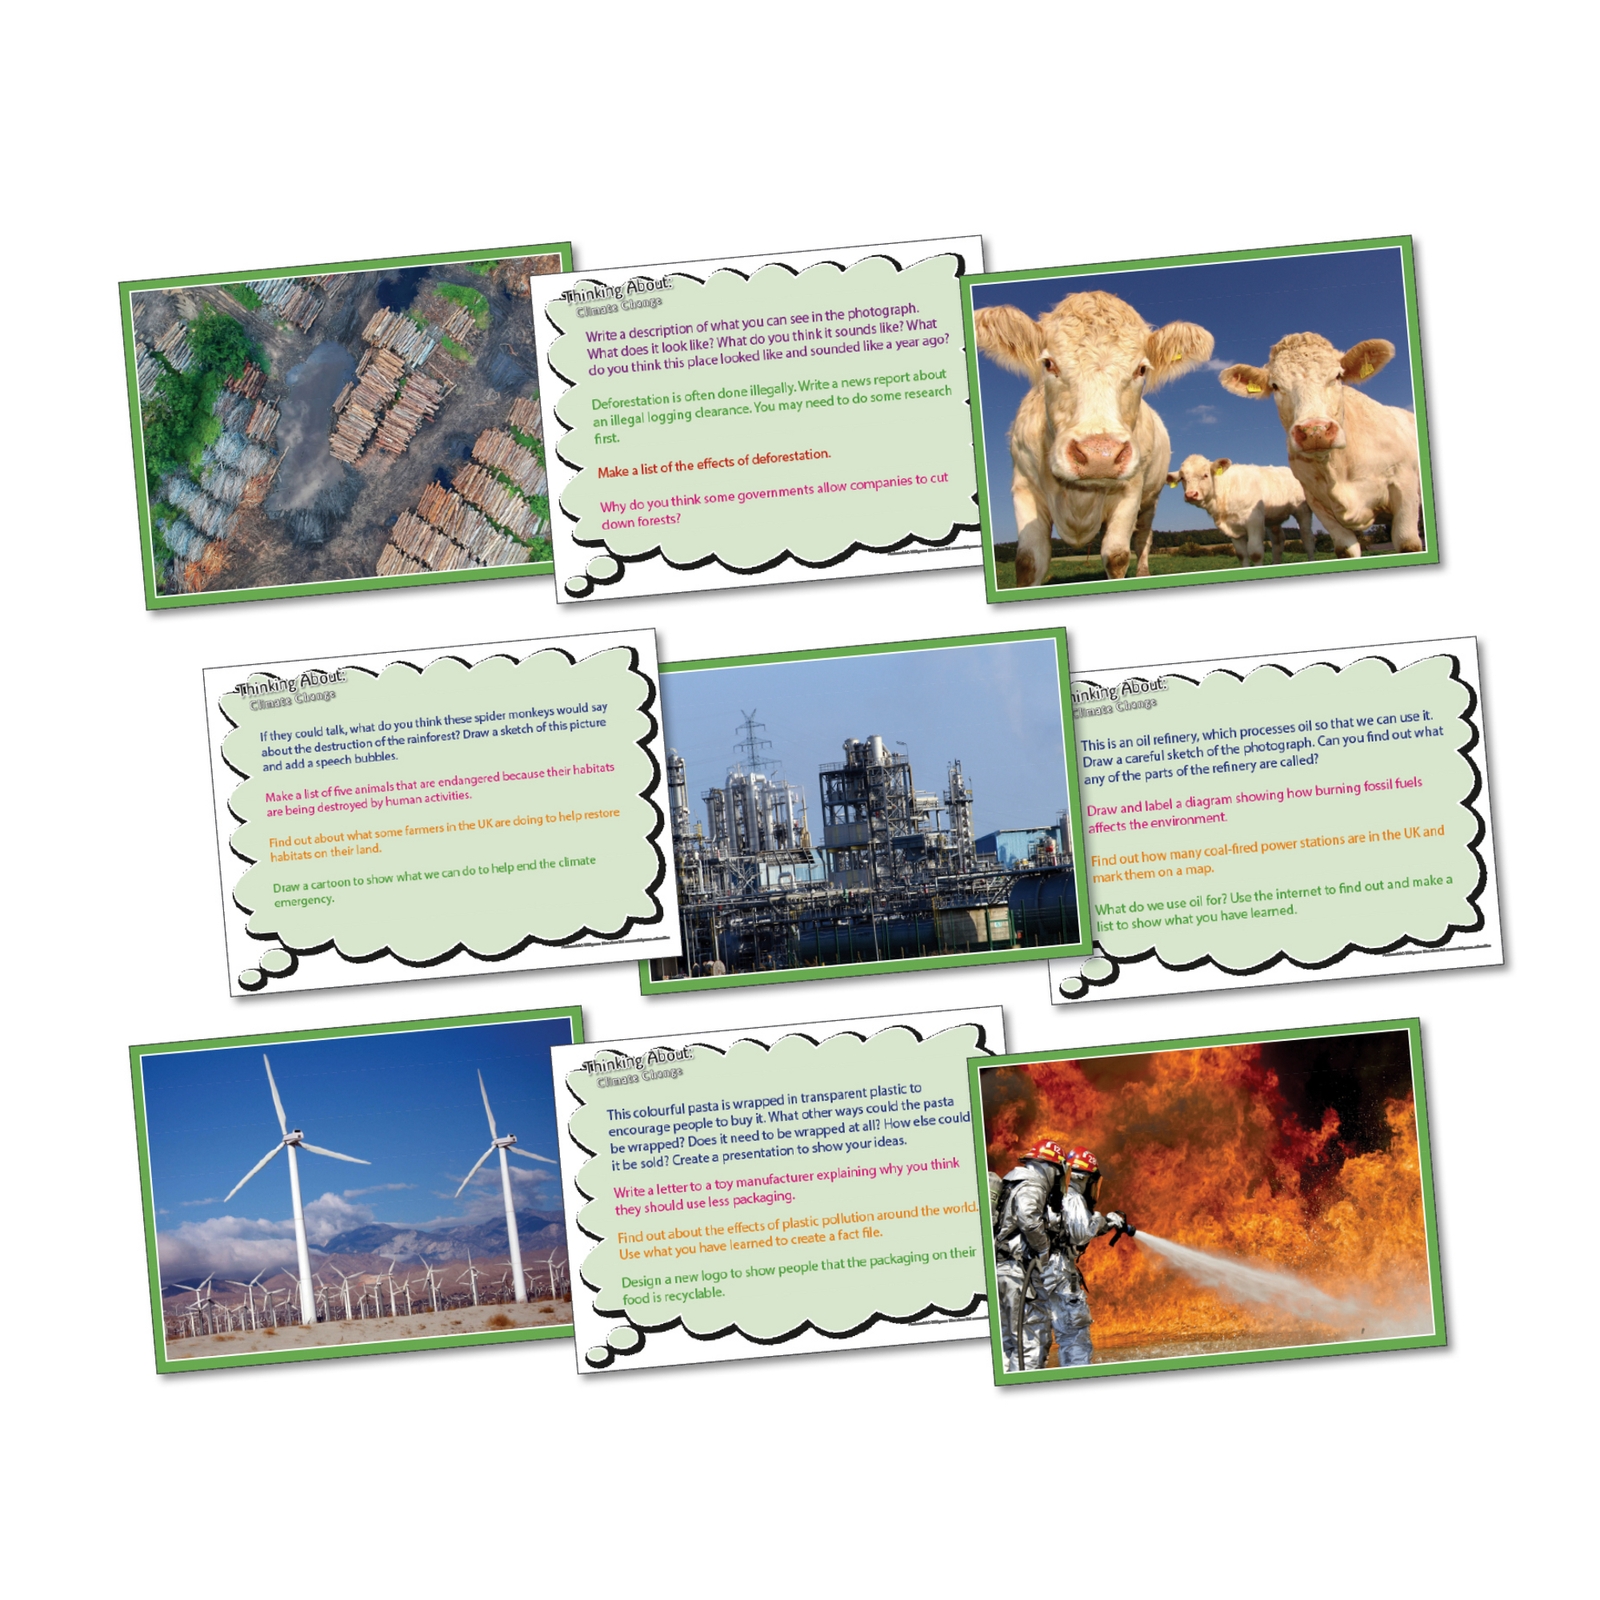 Thinking About Climate Change Cards